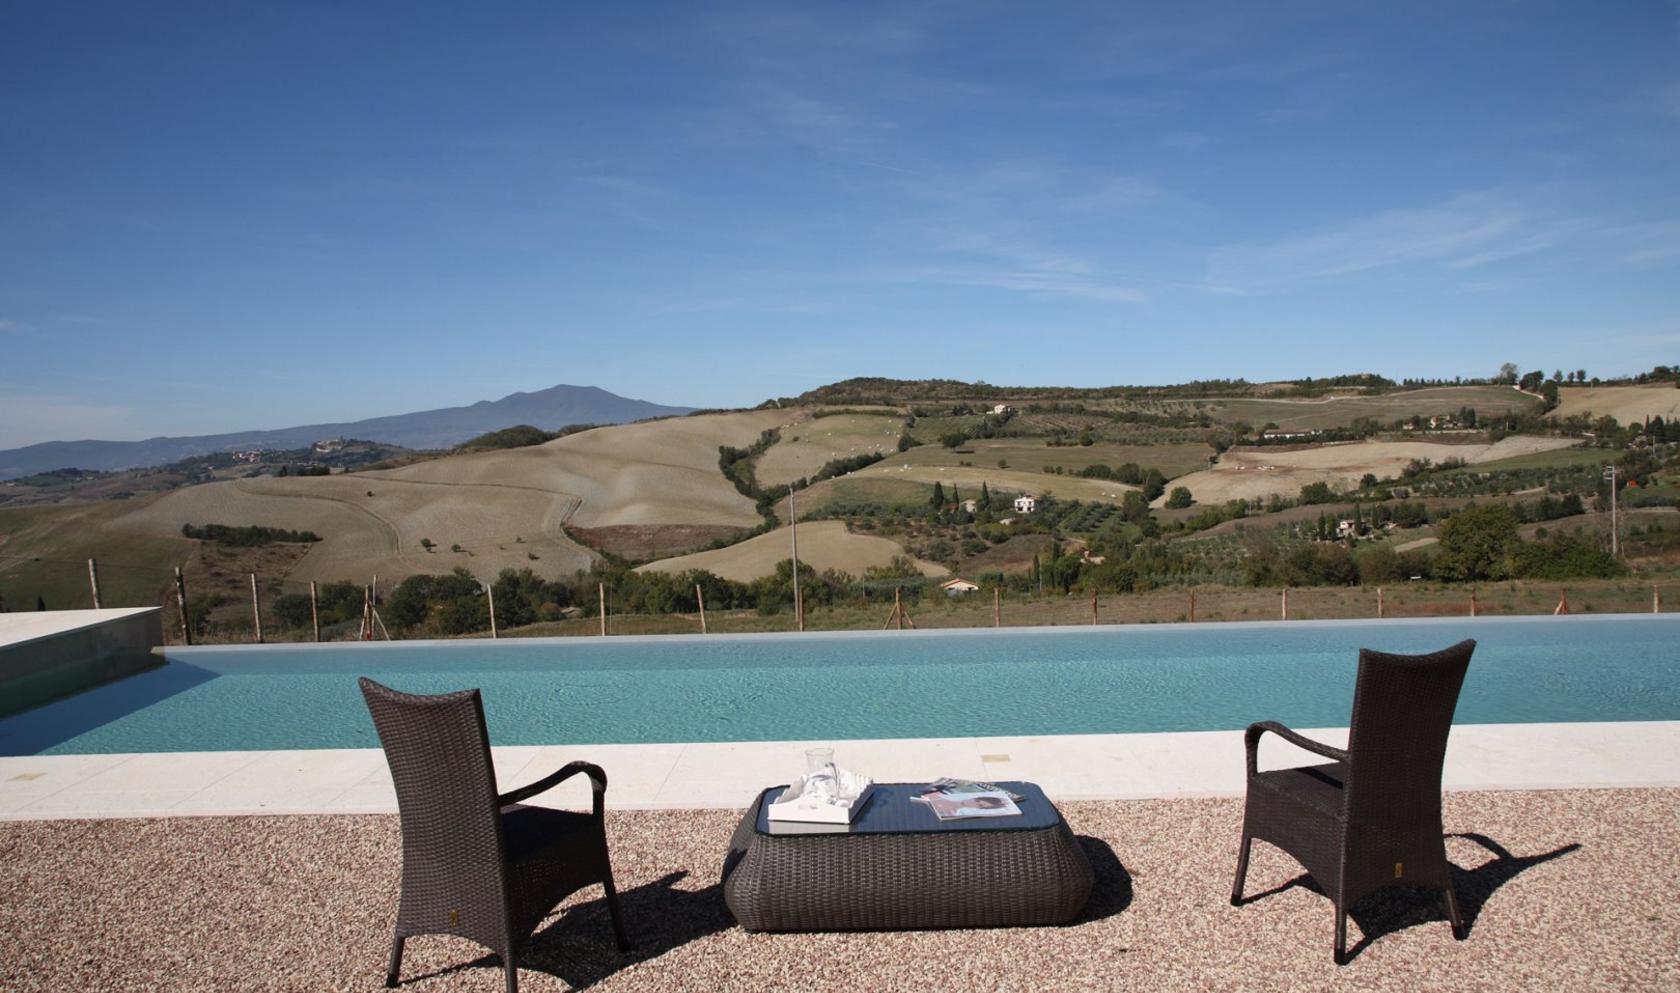 Toscana Immobiliare - Luxury apartments for sale in an exclusive residential complex in San Casciano bagni, Siena, Tuscany, near the famous thermal area of Fonteverde